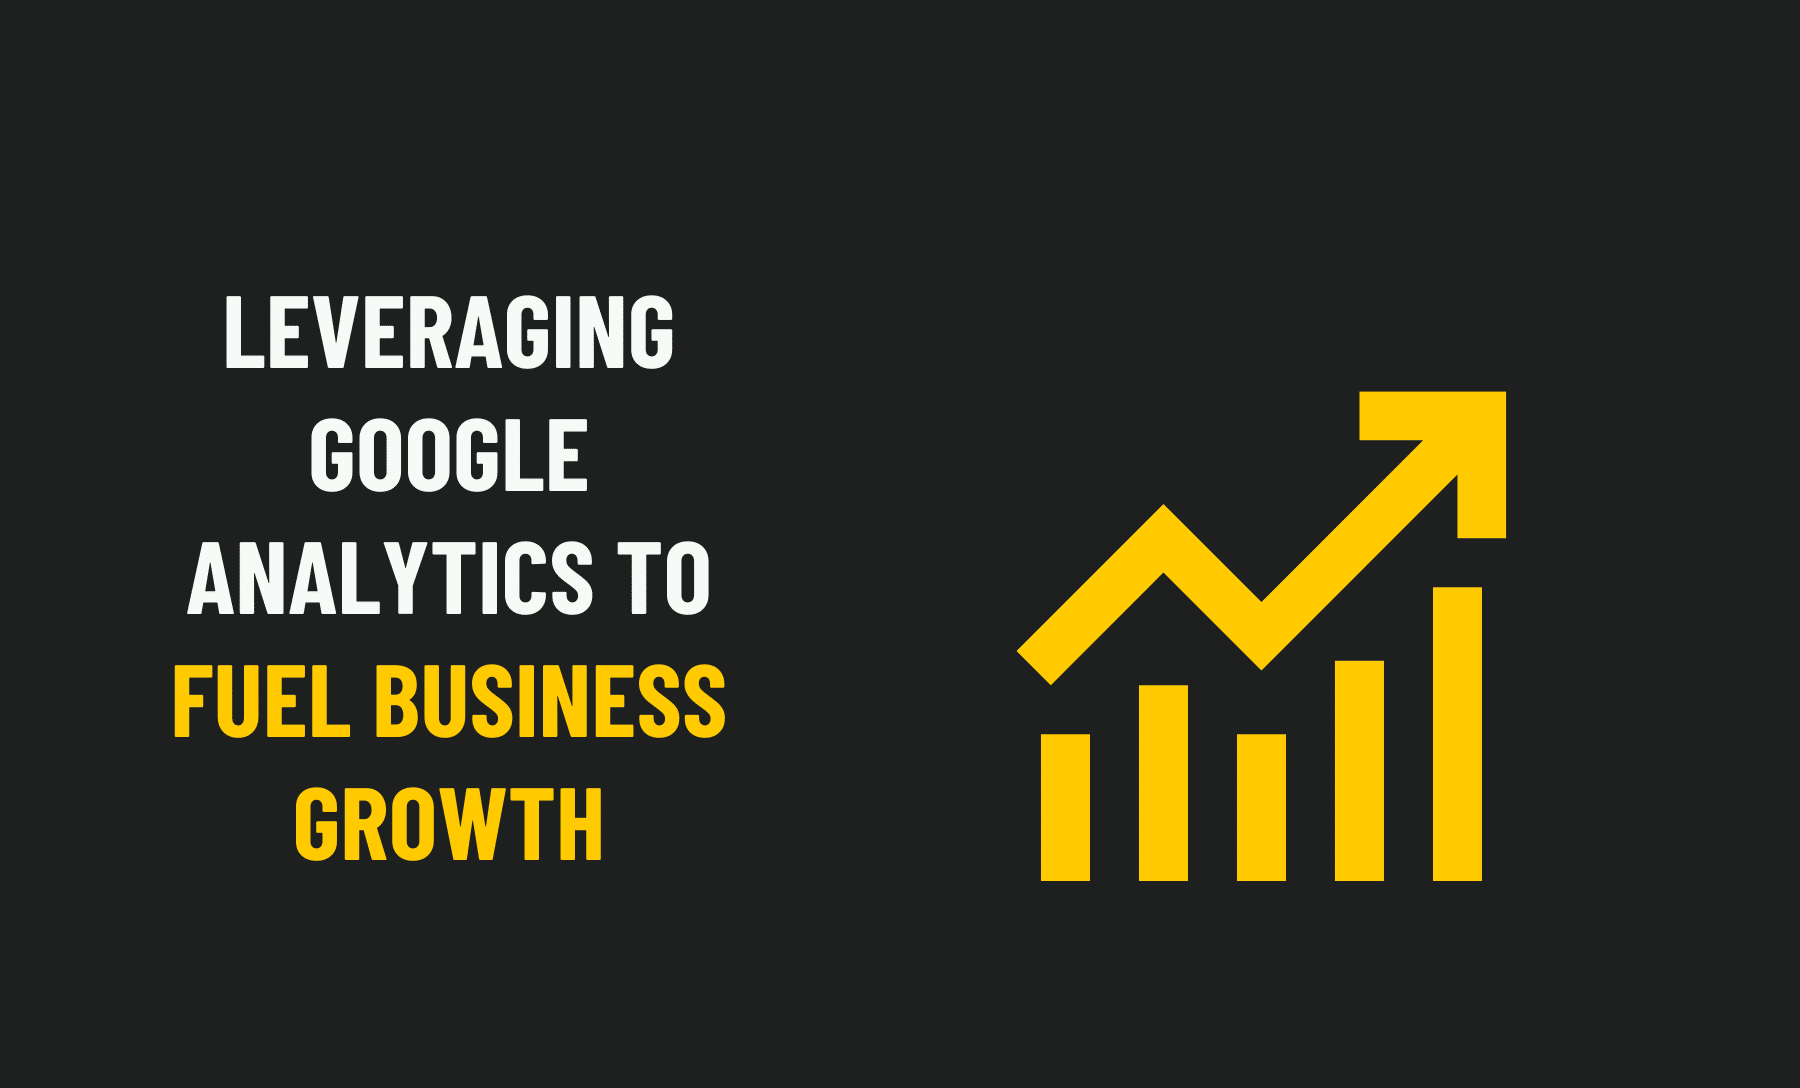 Leveraging Google Analytics to Fuel Business Growth